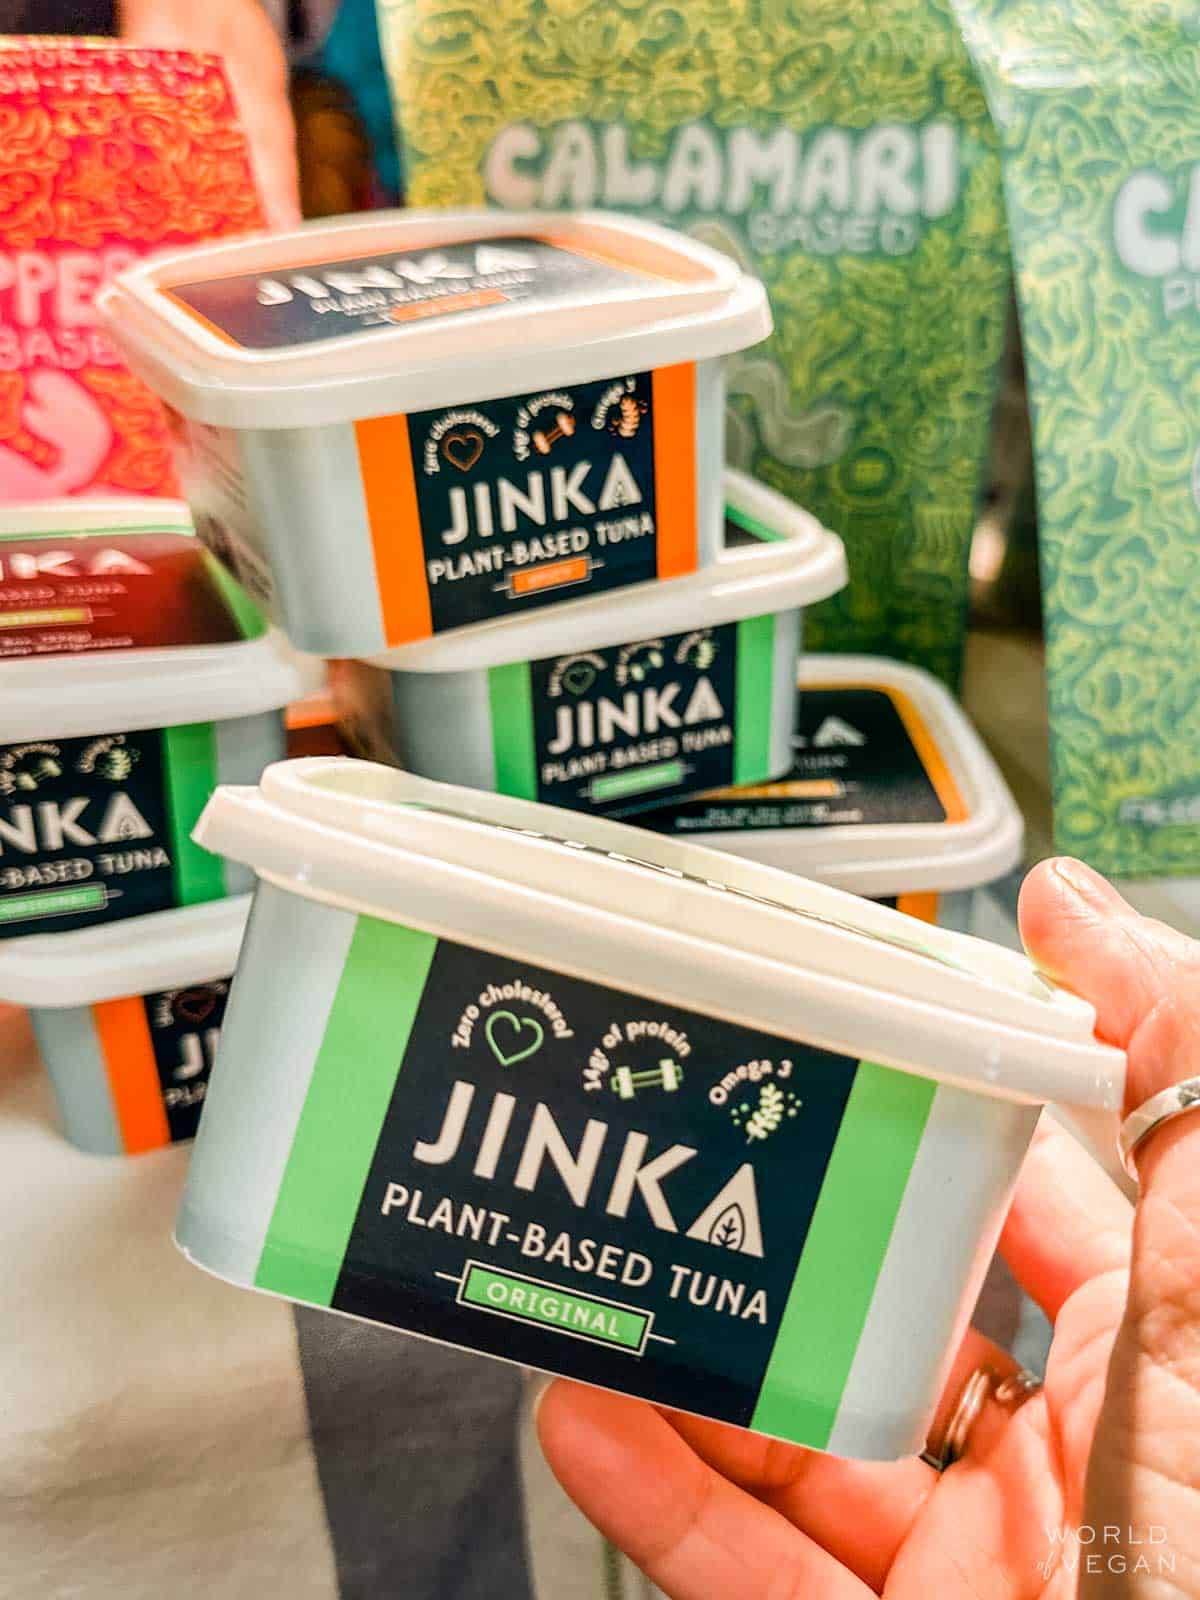 A container of Jinka brand plant-based tuna.